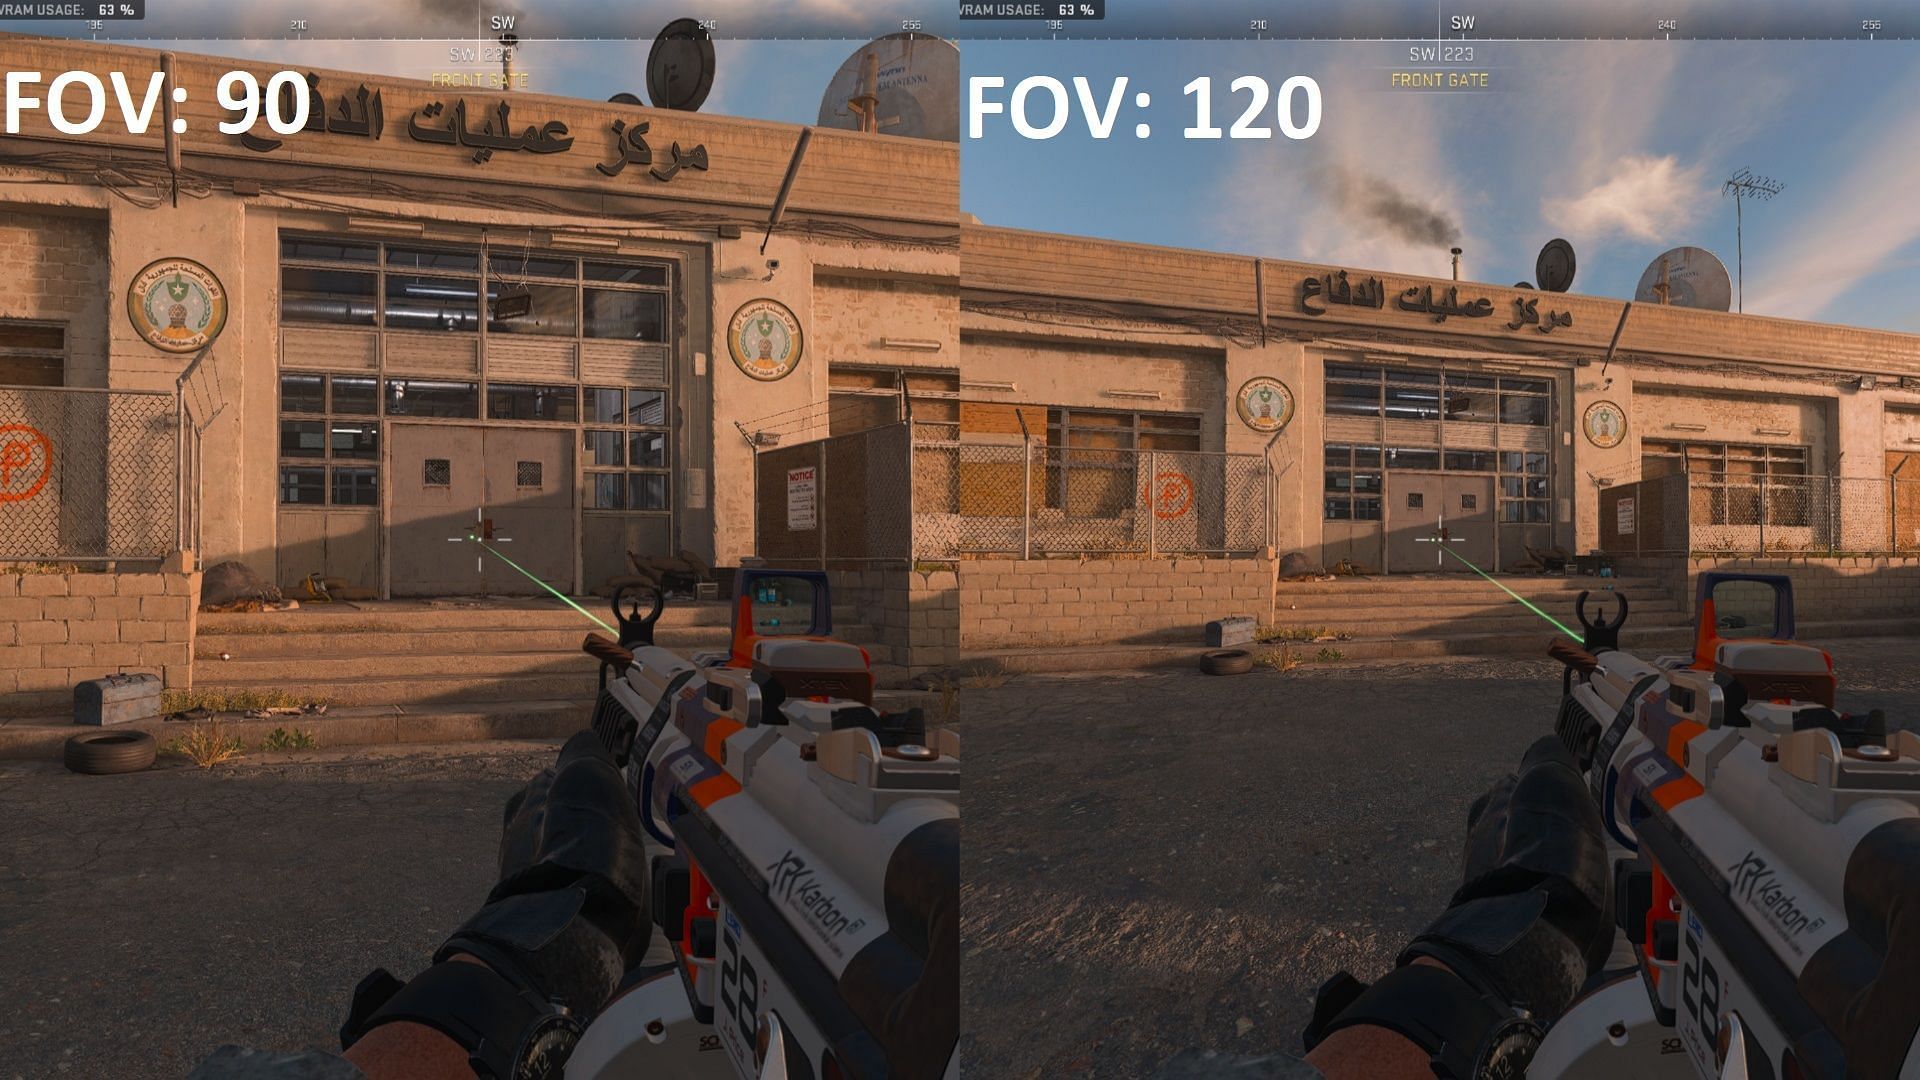 Best FOV for Warzone 